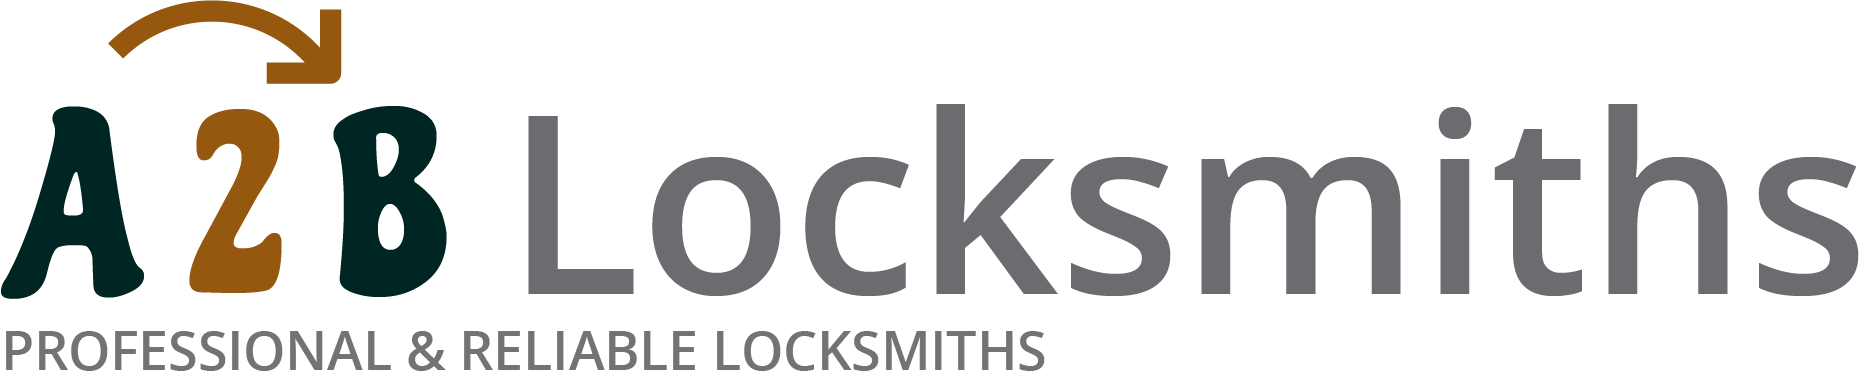 If you are locked out of house in Bishops Stortford, our 24/7 local emergency locksmith services can help you.